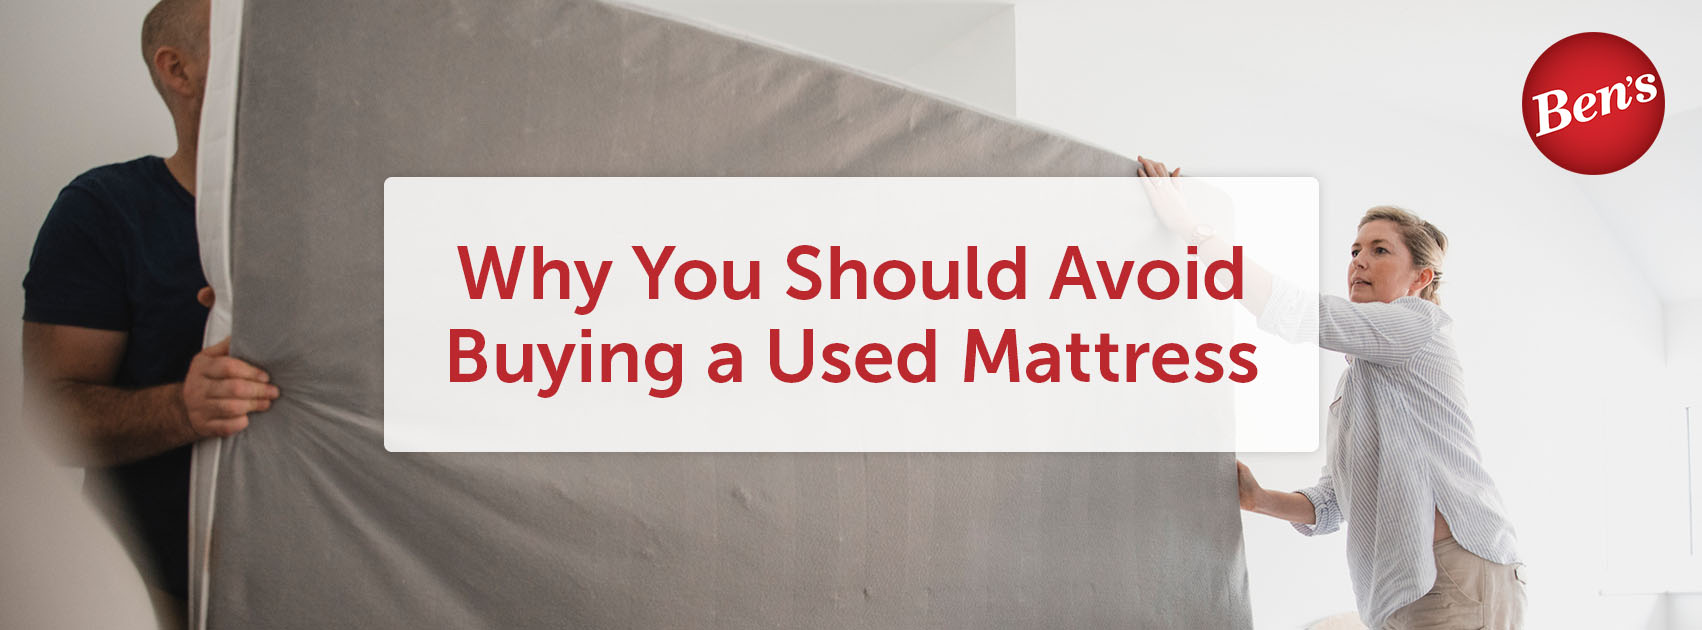 is it safe to buy a used mattress?